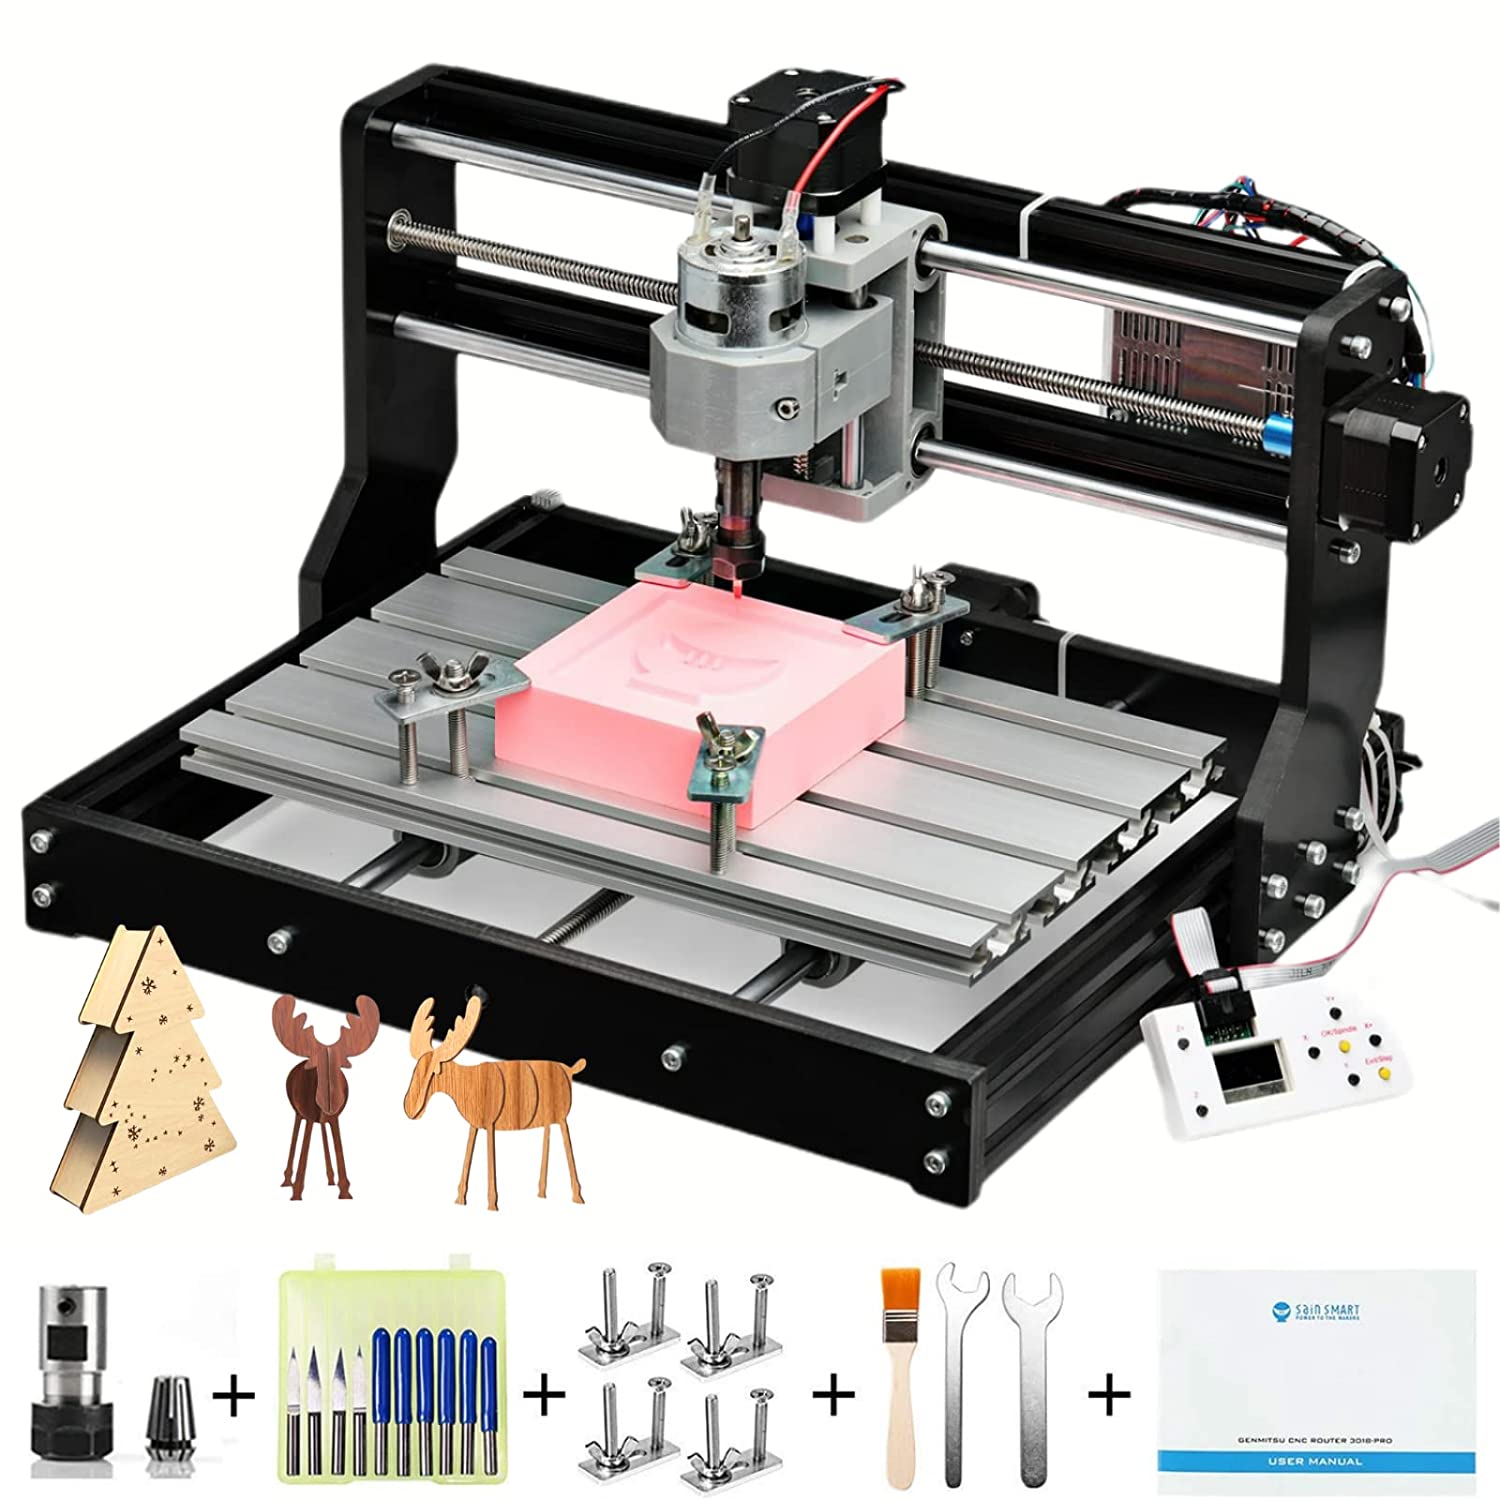 The Genmitsu CNC 3018-PRO Router Kit GRBL Control 3 Axis: The Perfect Entry-Level Machine for CNC Woodworking